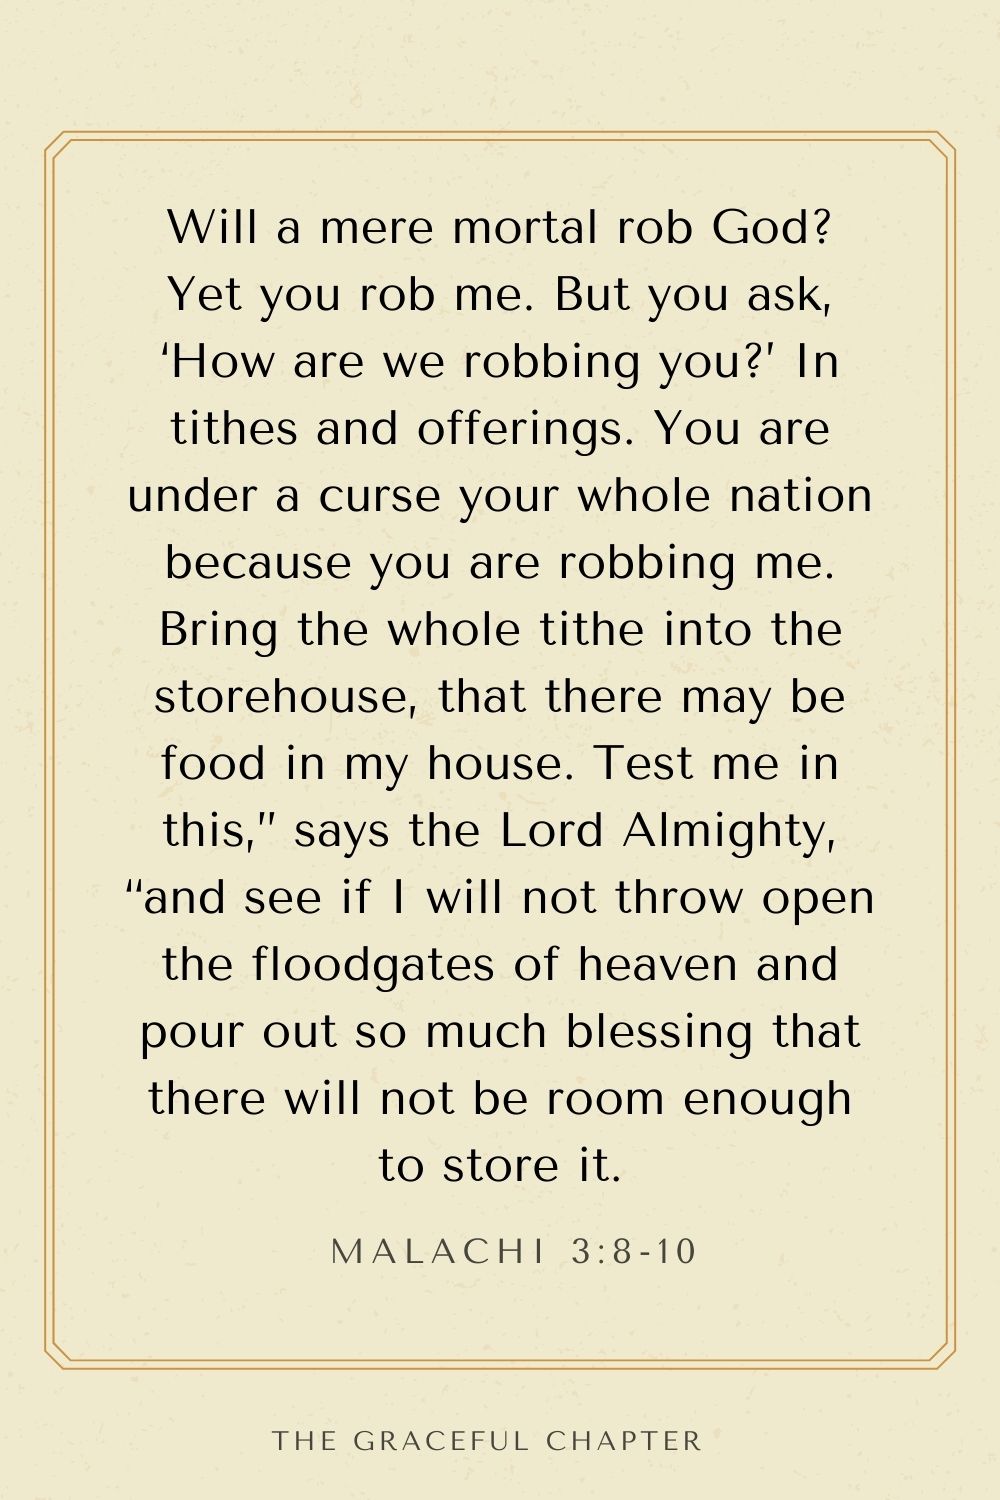 Will a mere mortal rob God? Yet you rob me. But you ask, ‘How are we robbing you?’ In tithes and offerings. You are under a curse your whole nation because you are robbing me. Bring the whole tithe into the storehouse, that there may be food in my house. Test me in this,” says the Lord Almighty, “and see if I will not throw open the floodgates of heaven and pour out so much blessing that there will not be room enough to store it. Malachi 3:8-10